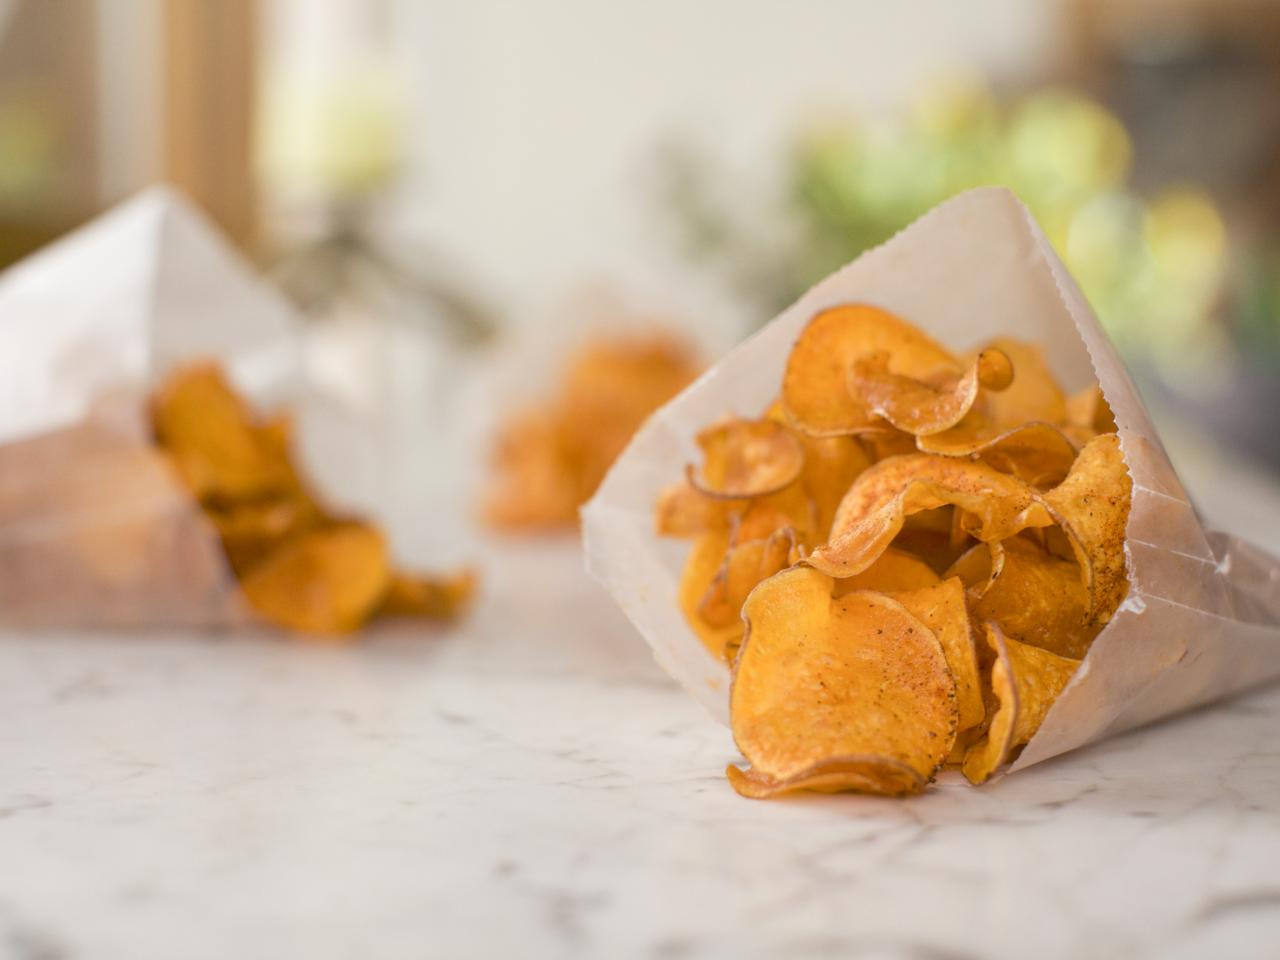 Spiced-Up Potato Chips Recipe, Ree Drummond